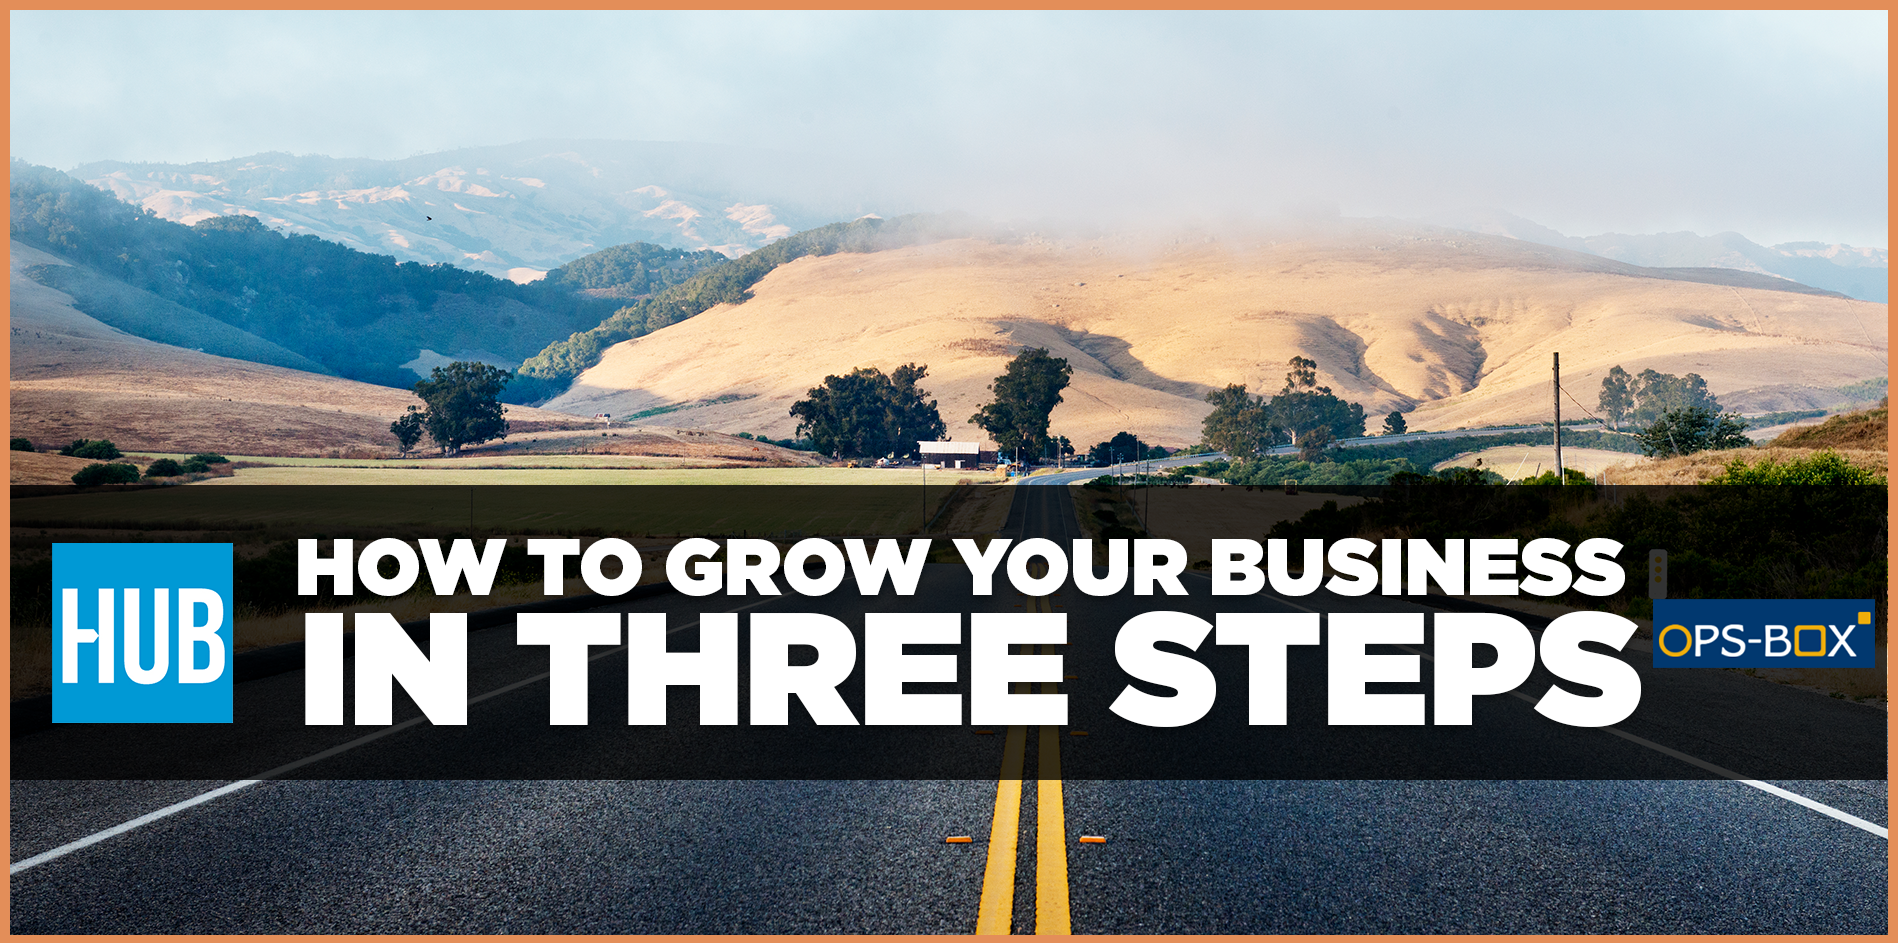 How to grow your business in three steps